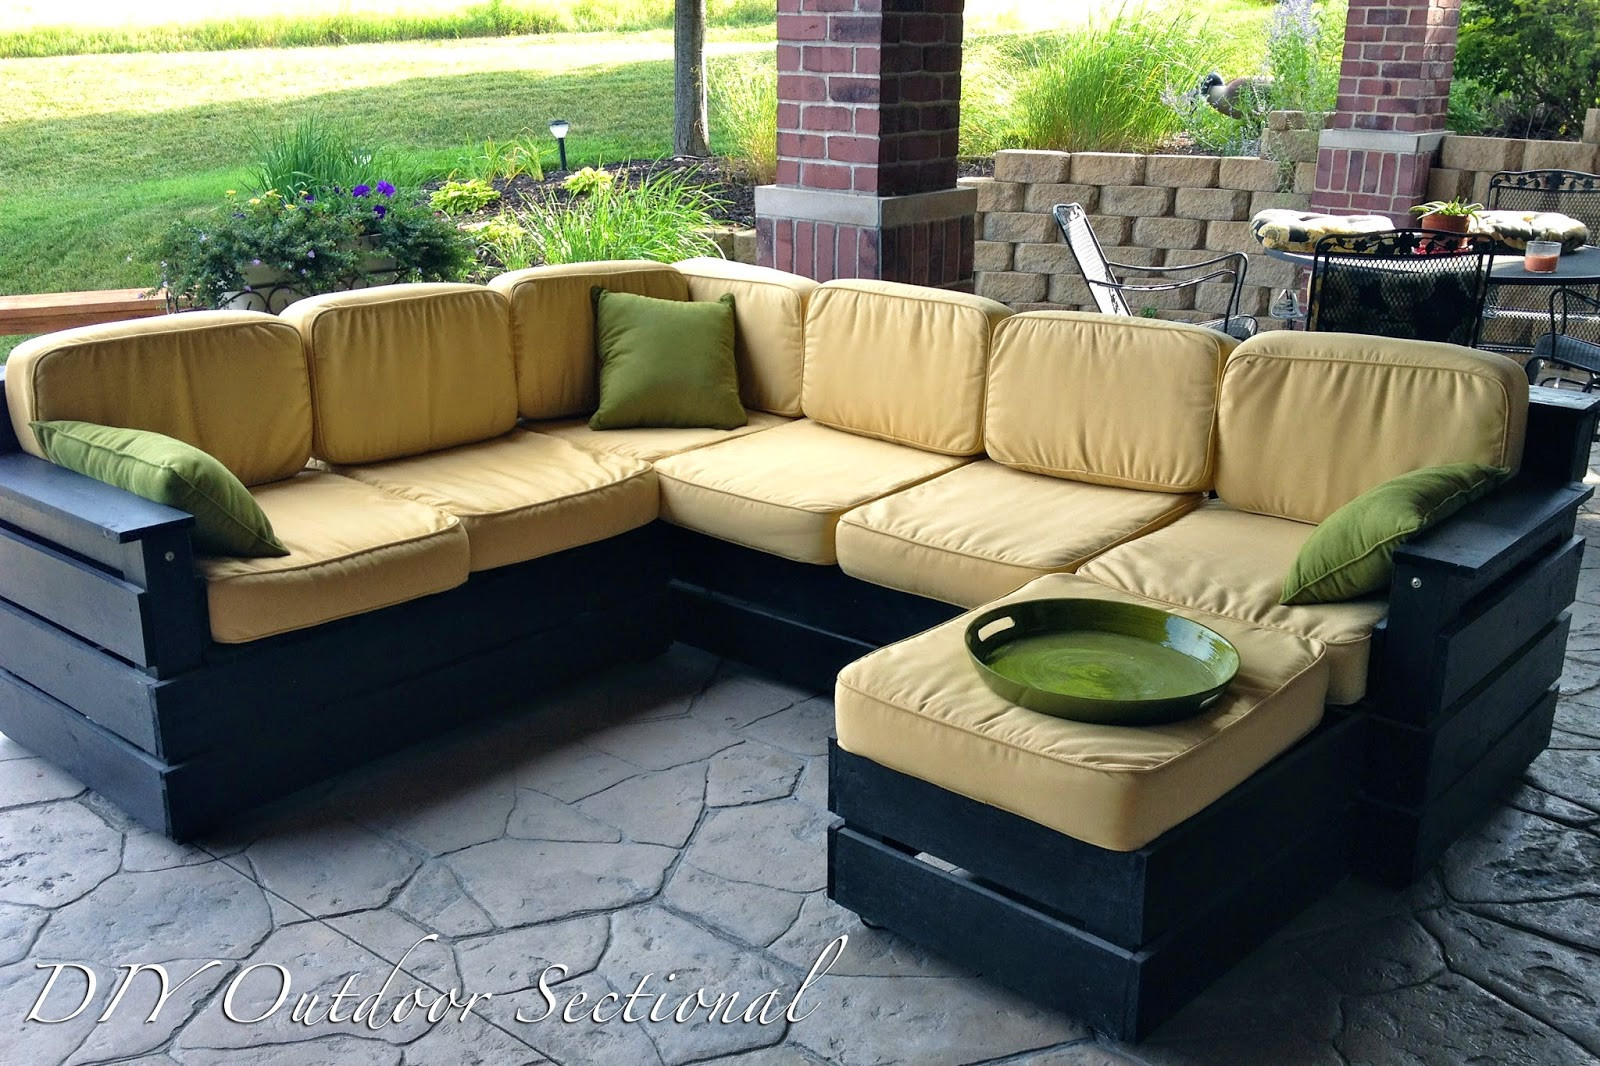 DIY Outdoor Sectional Sofa
 DIY Why Spend More DIY Outdoor Sectional